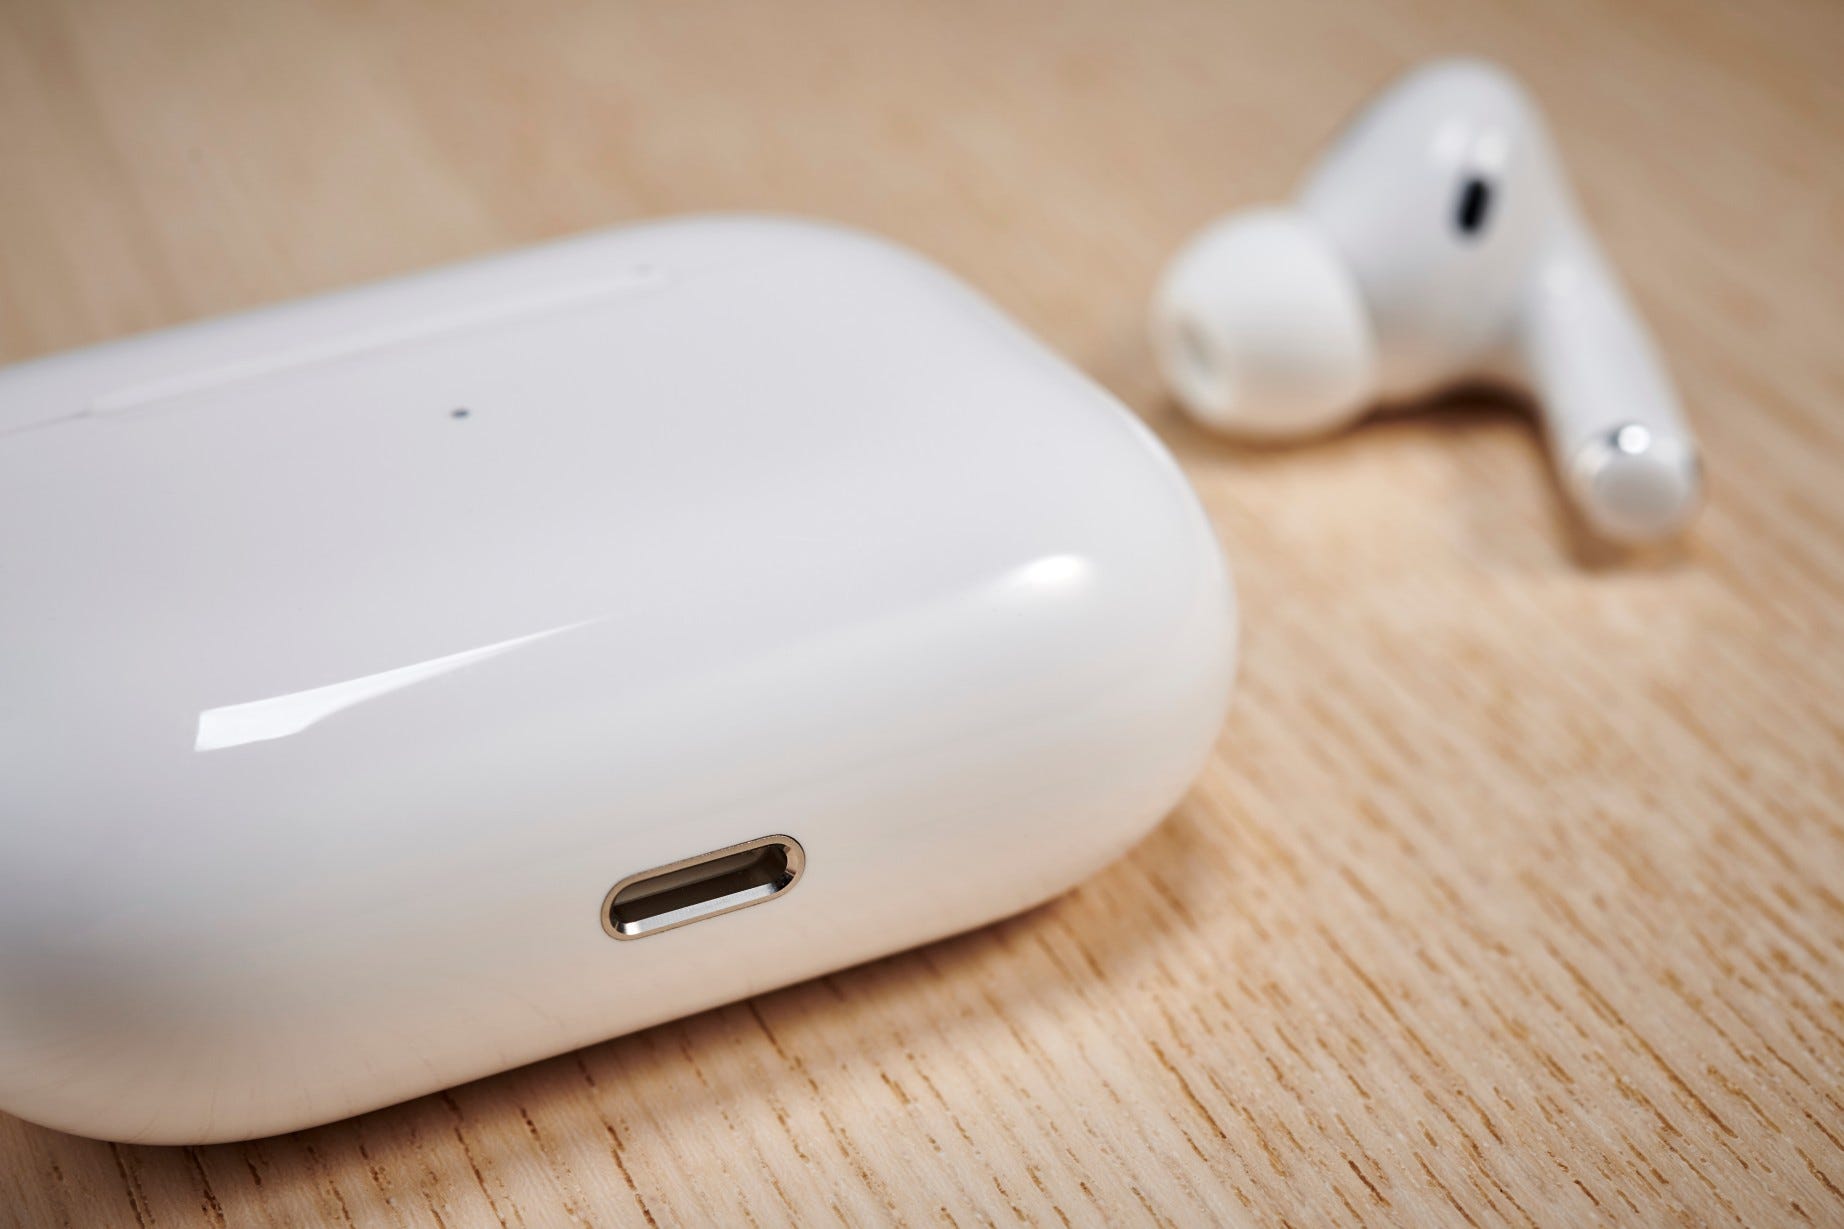 Apple AirPods Pro charging case